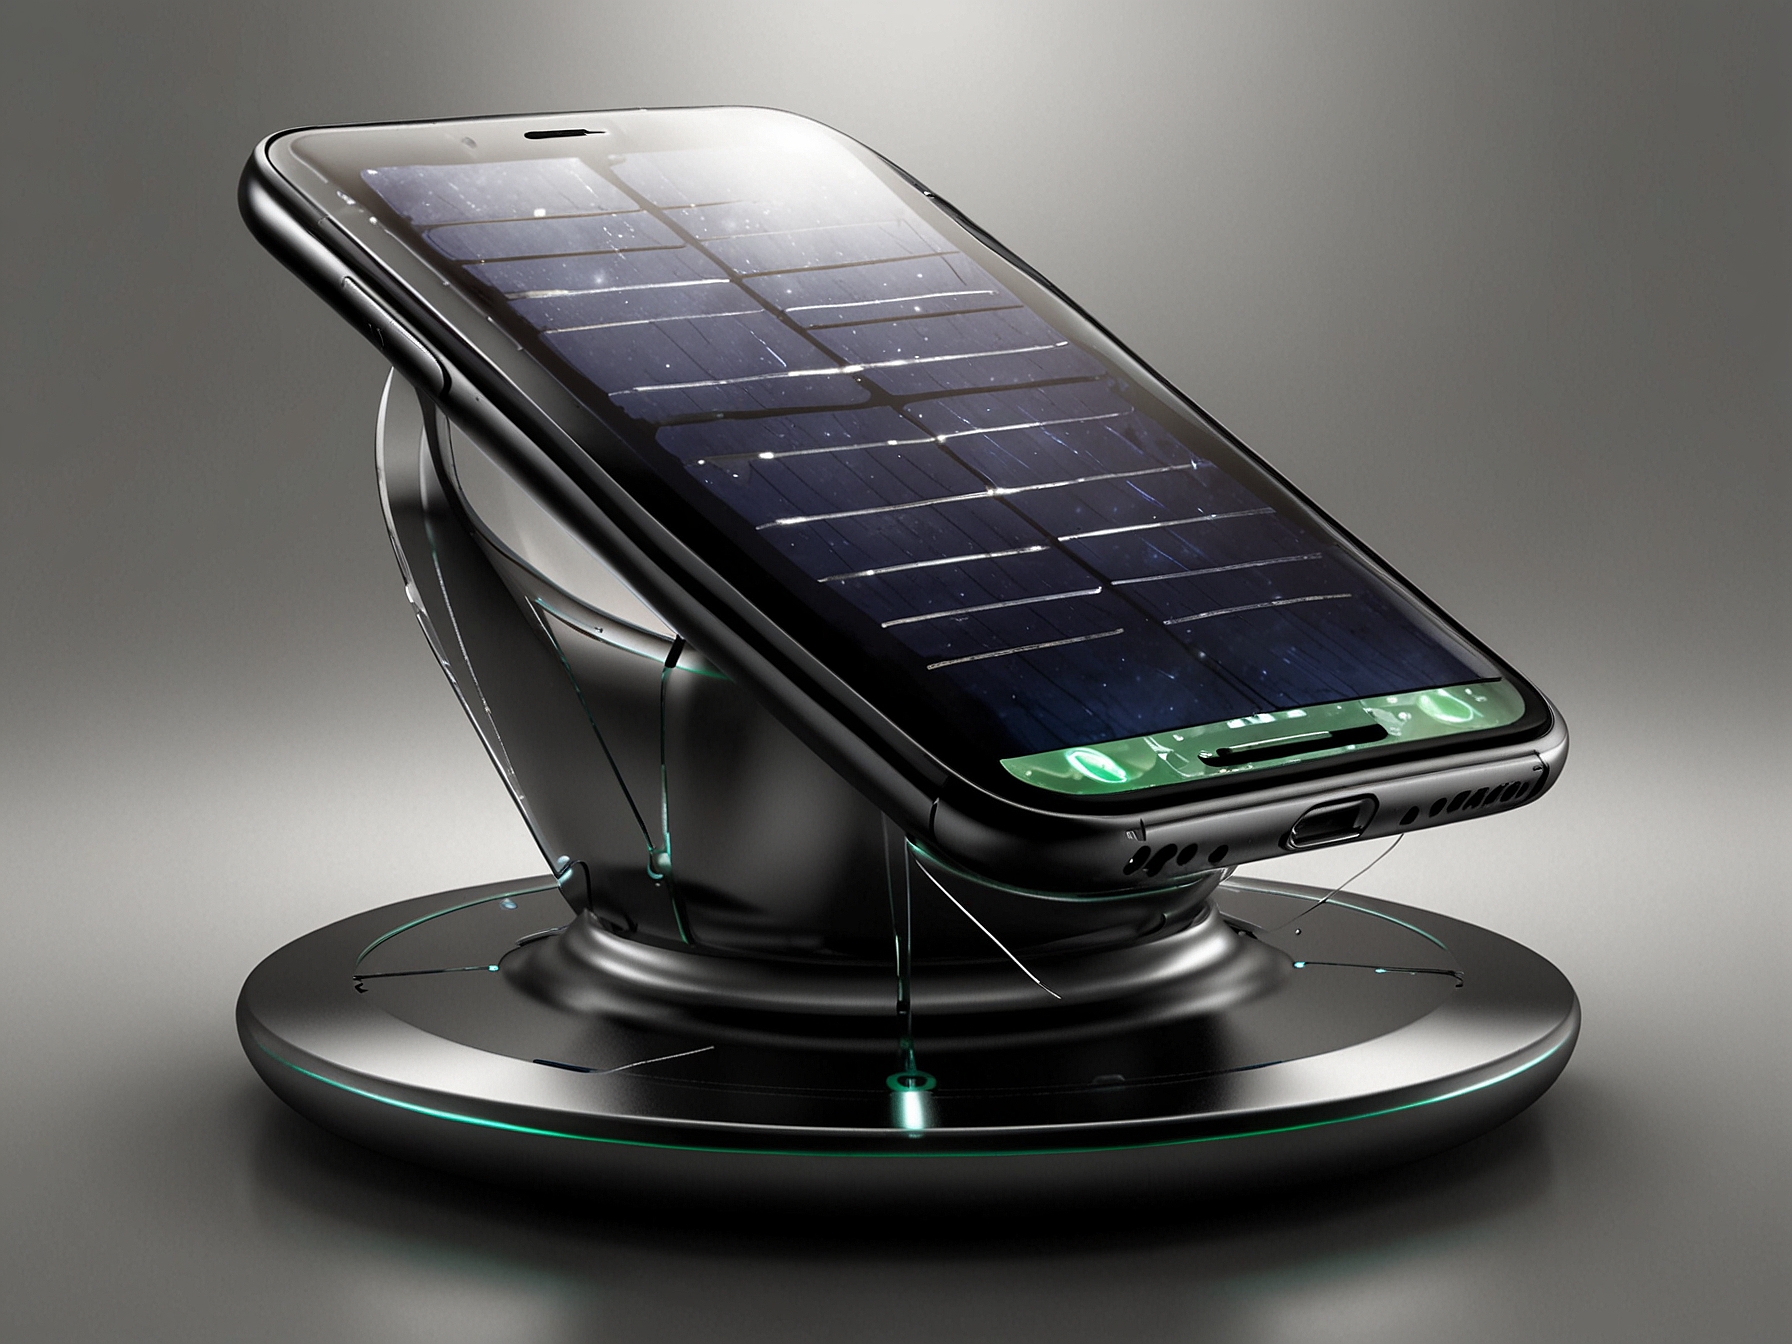 Concept design of a futuristic iPhone with integrated solar panels and wireless charging capabilities, emphasizing Apple's push towards renewable energy and sustainability.